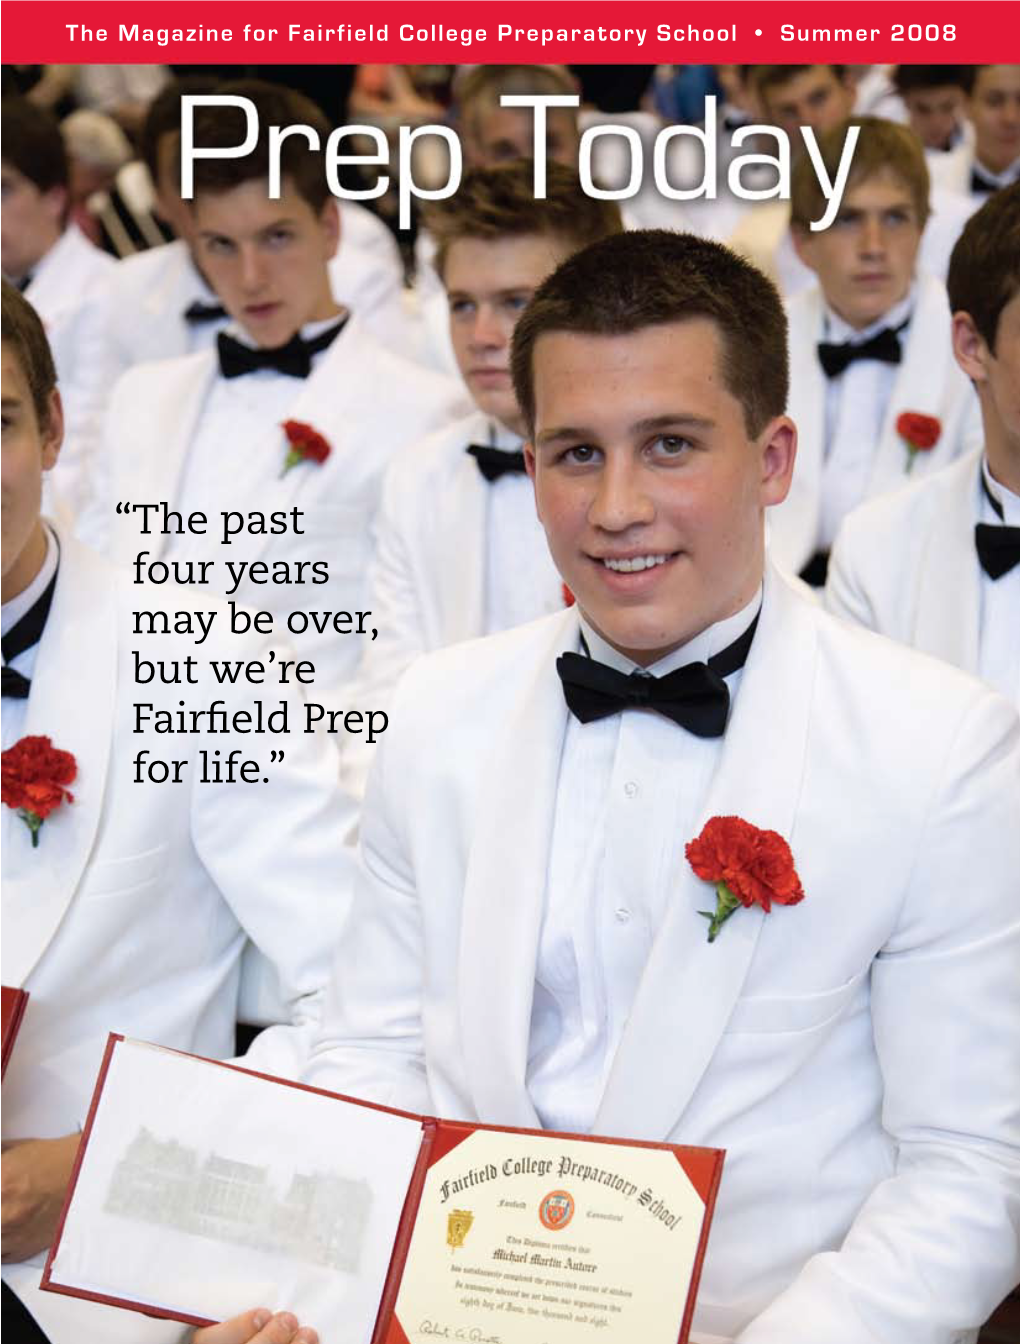 “The Past Four Years May Be Over, but We're Fairfield Prep for Life.”